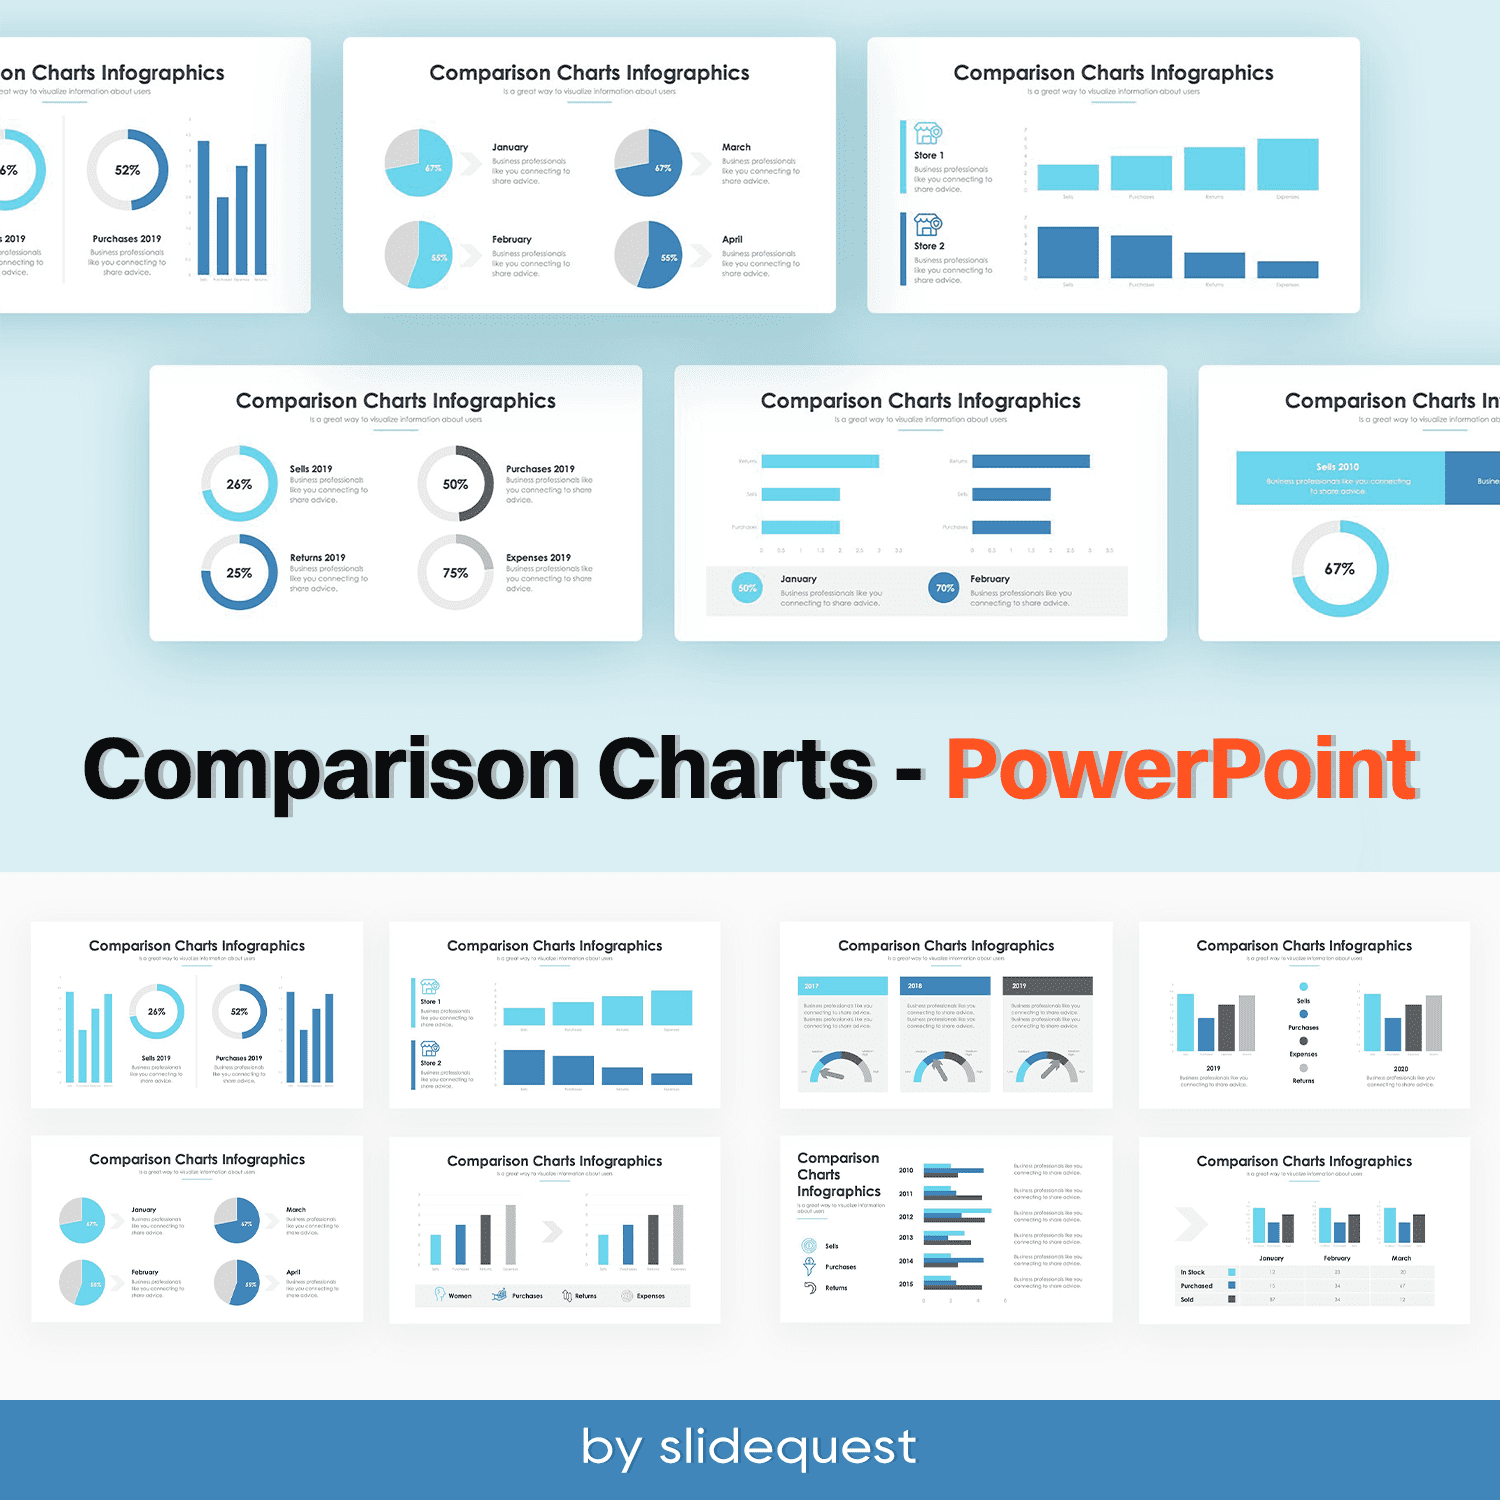 Comparison Charts - PowerPoint 3 cover image.